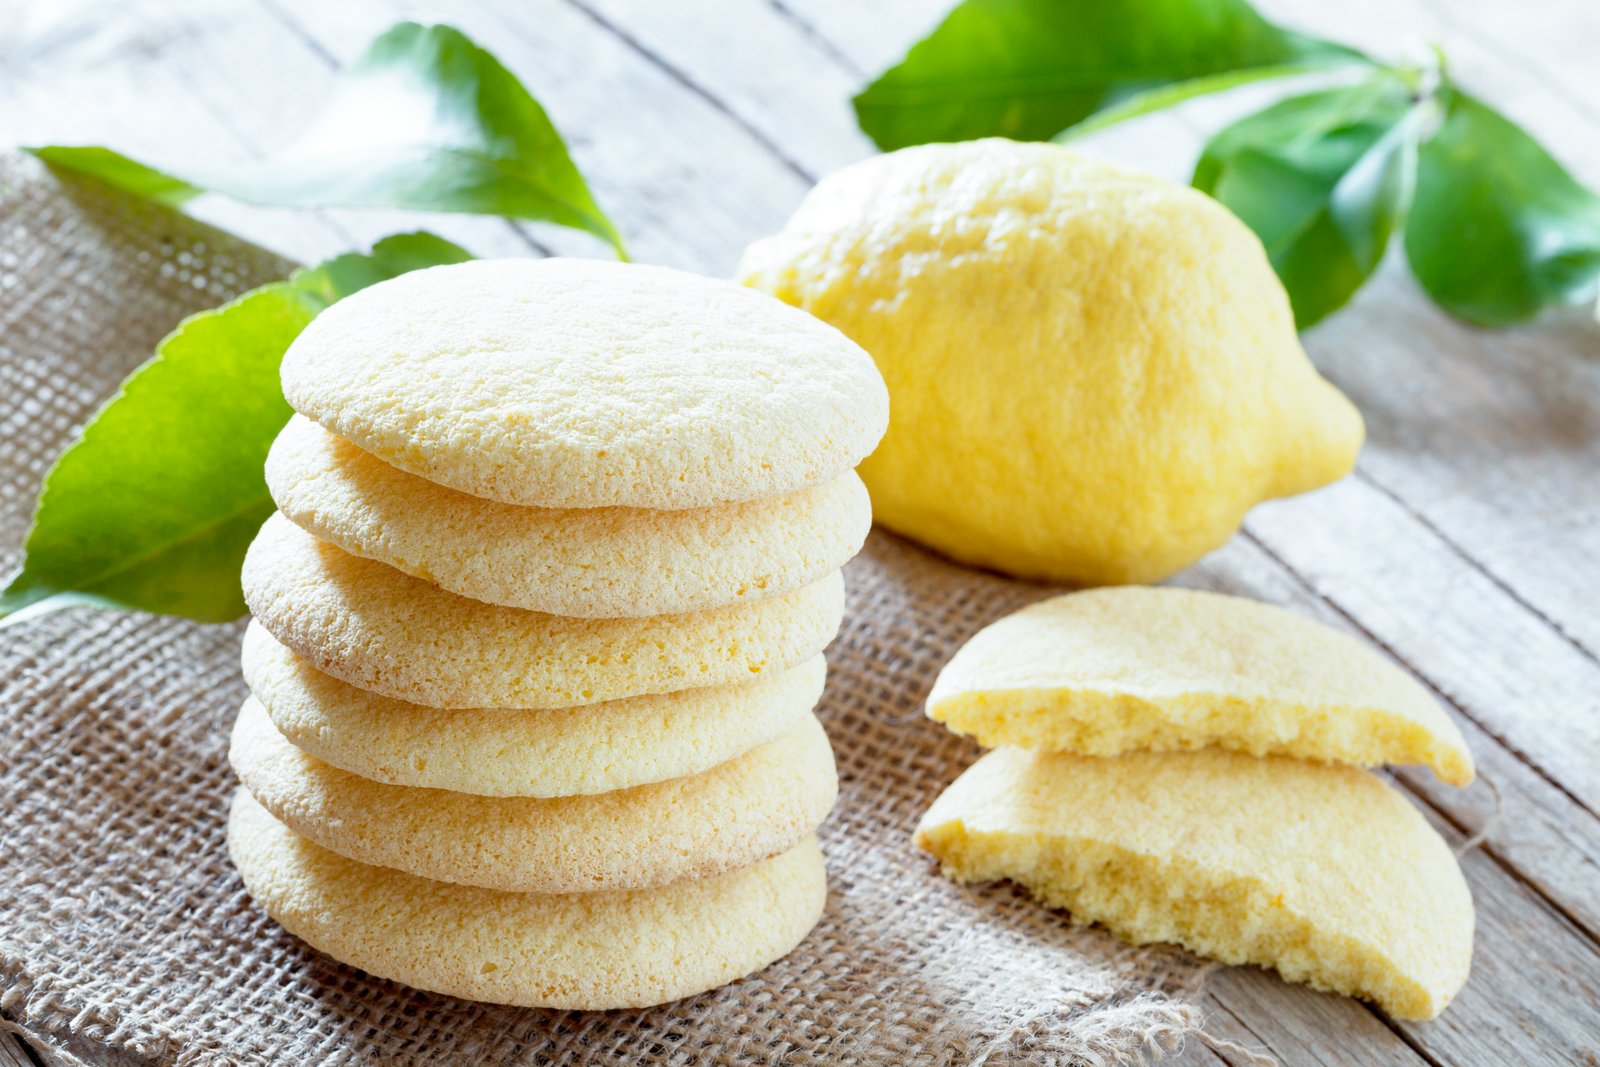 Shortbread Cookies With Citrus Zest Recipe By Archana S Kitchen,Nyjer Seed Niger Seed Plant